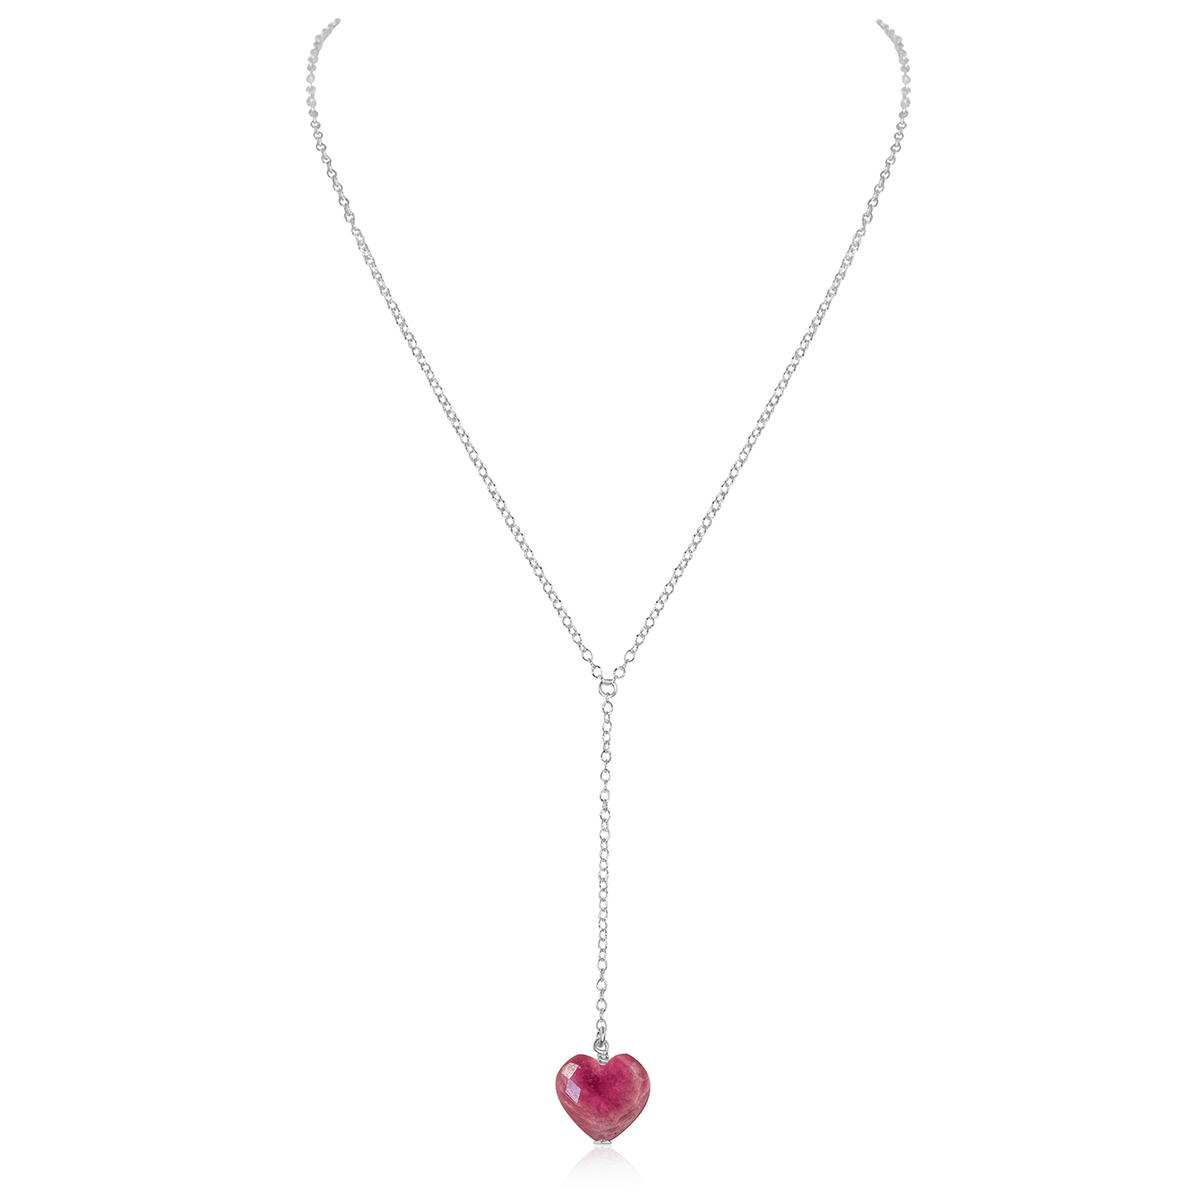 Ruby Crystal Heart Lariat Necklace - Ruby Crystal Heart Lariat Necklace - Sterling Silver - Luna Tide Handmade Crystal Jewellery